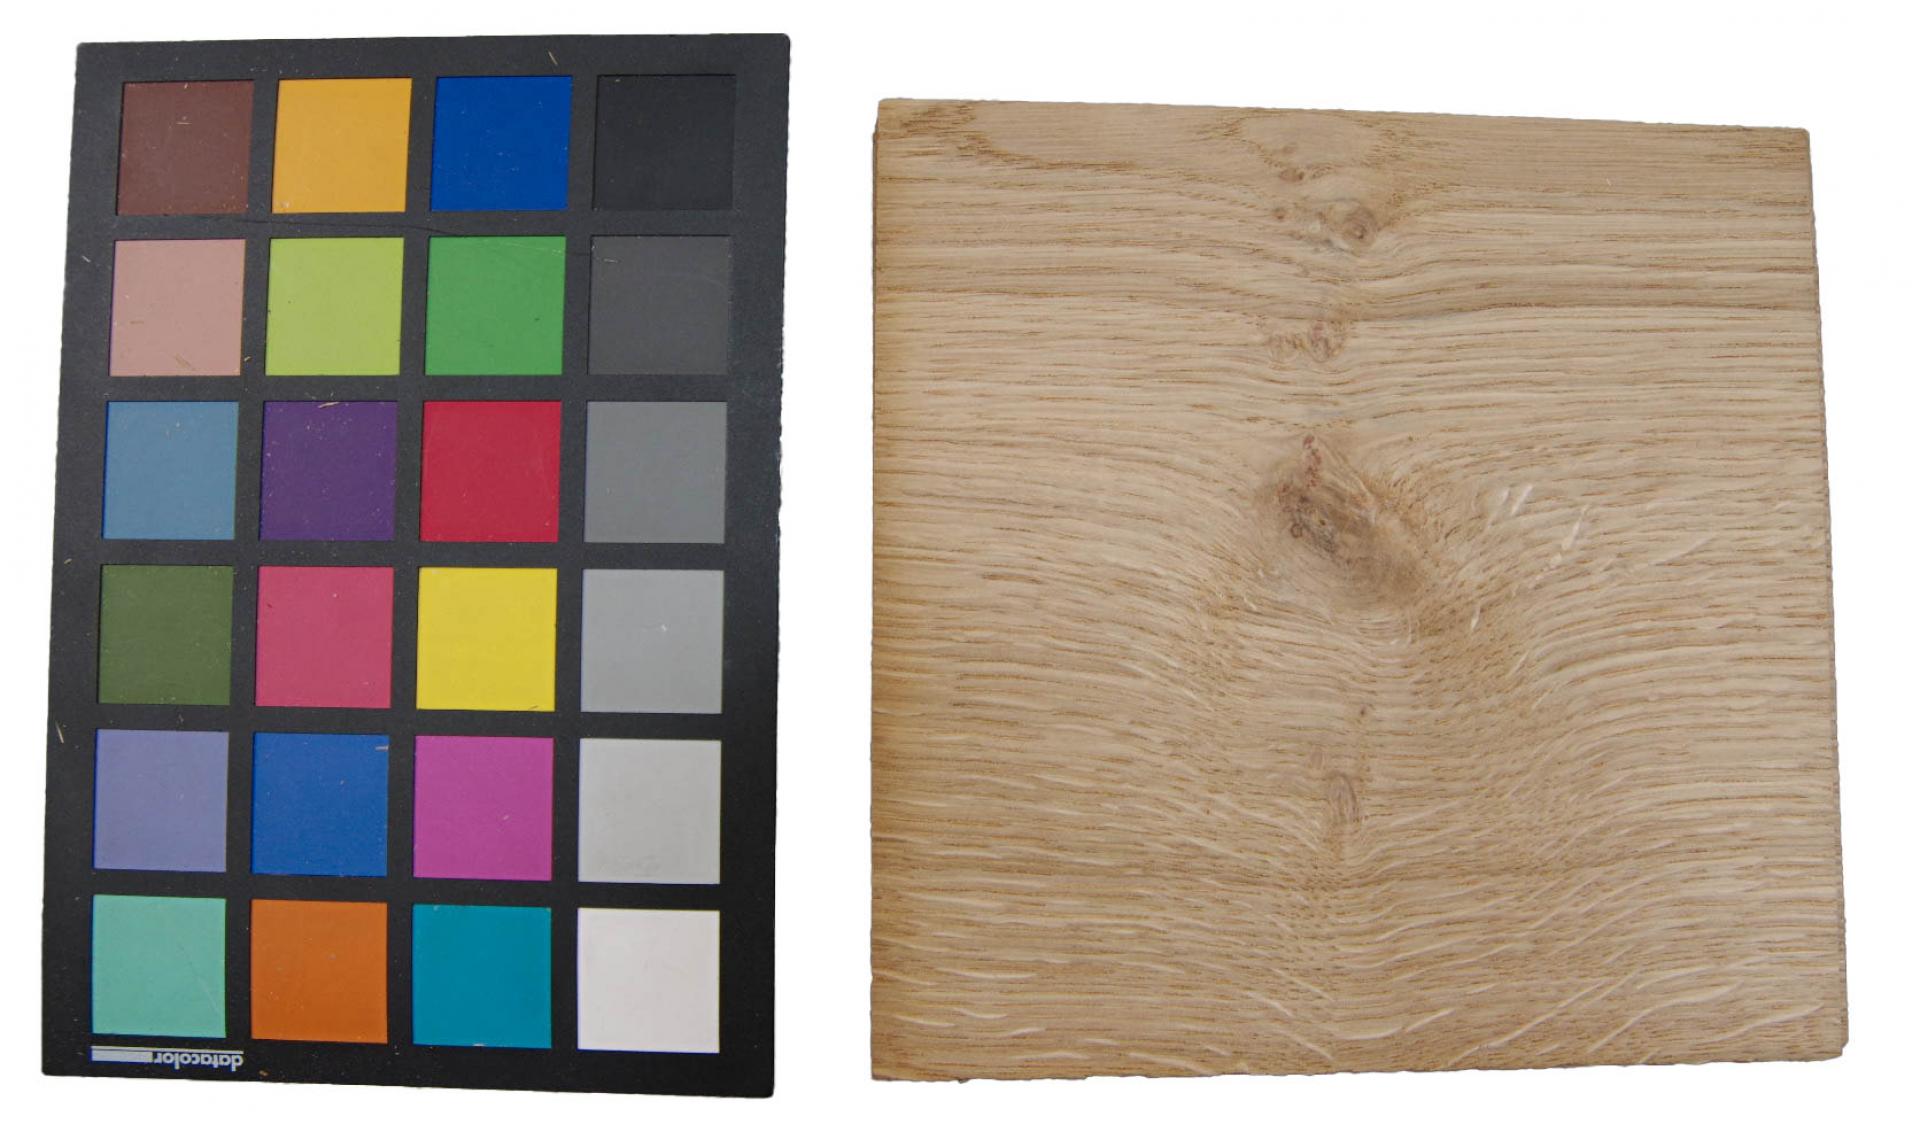 Knotty Oak, veneer with Colour reference card